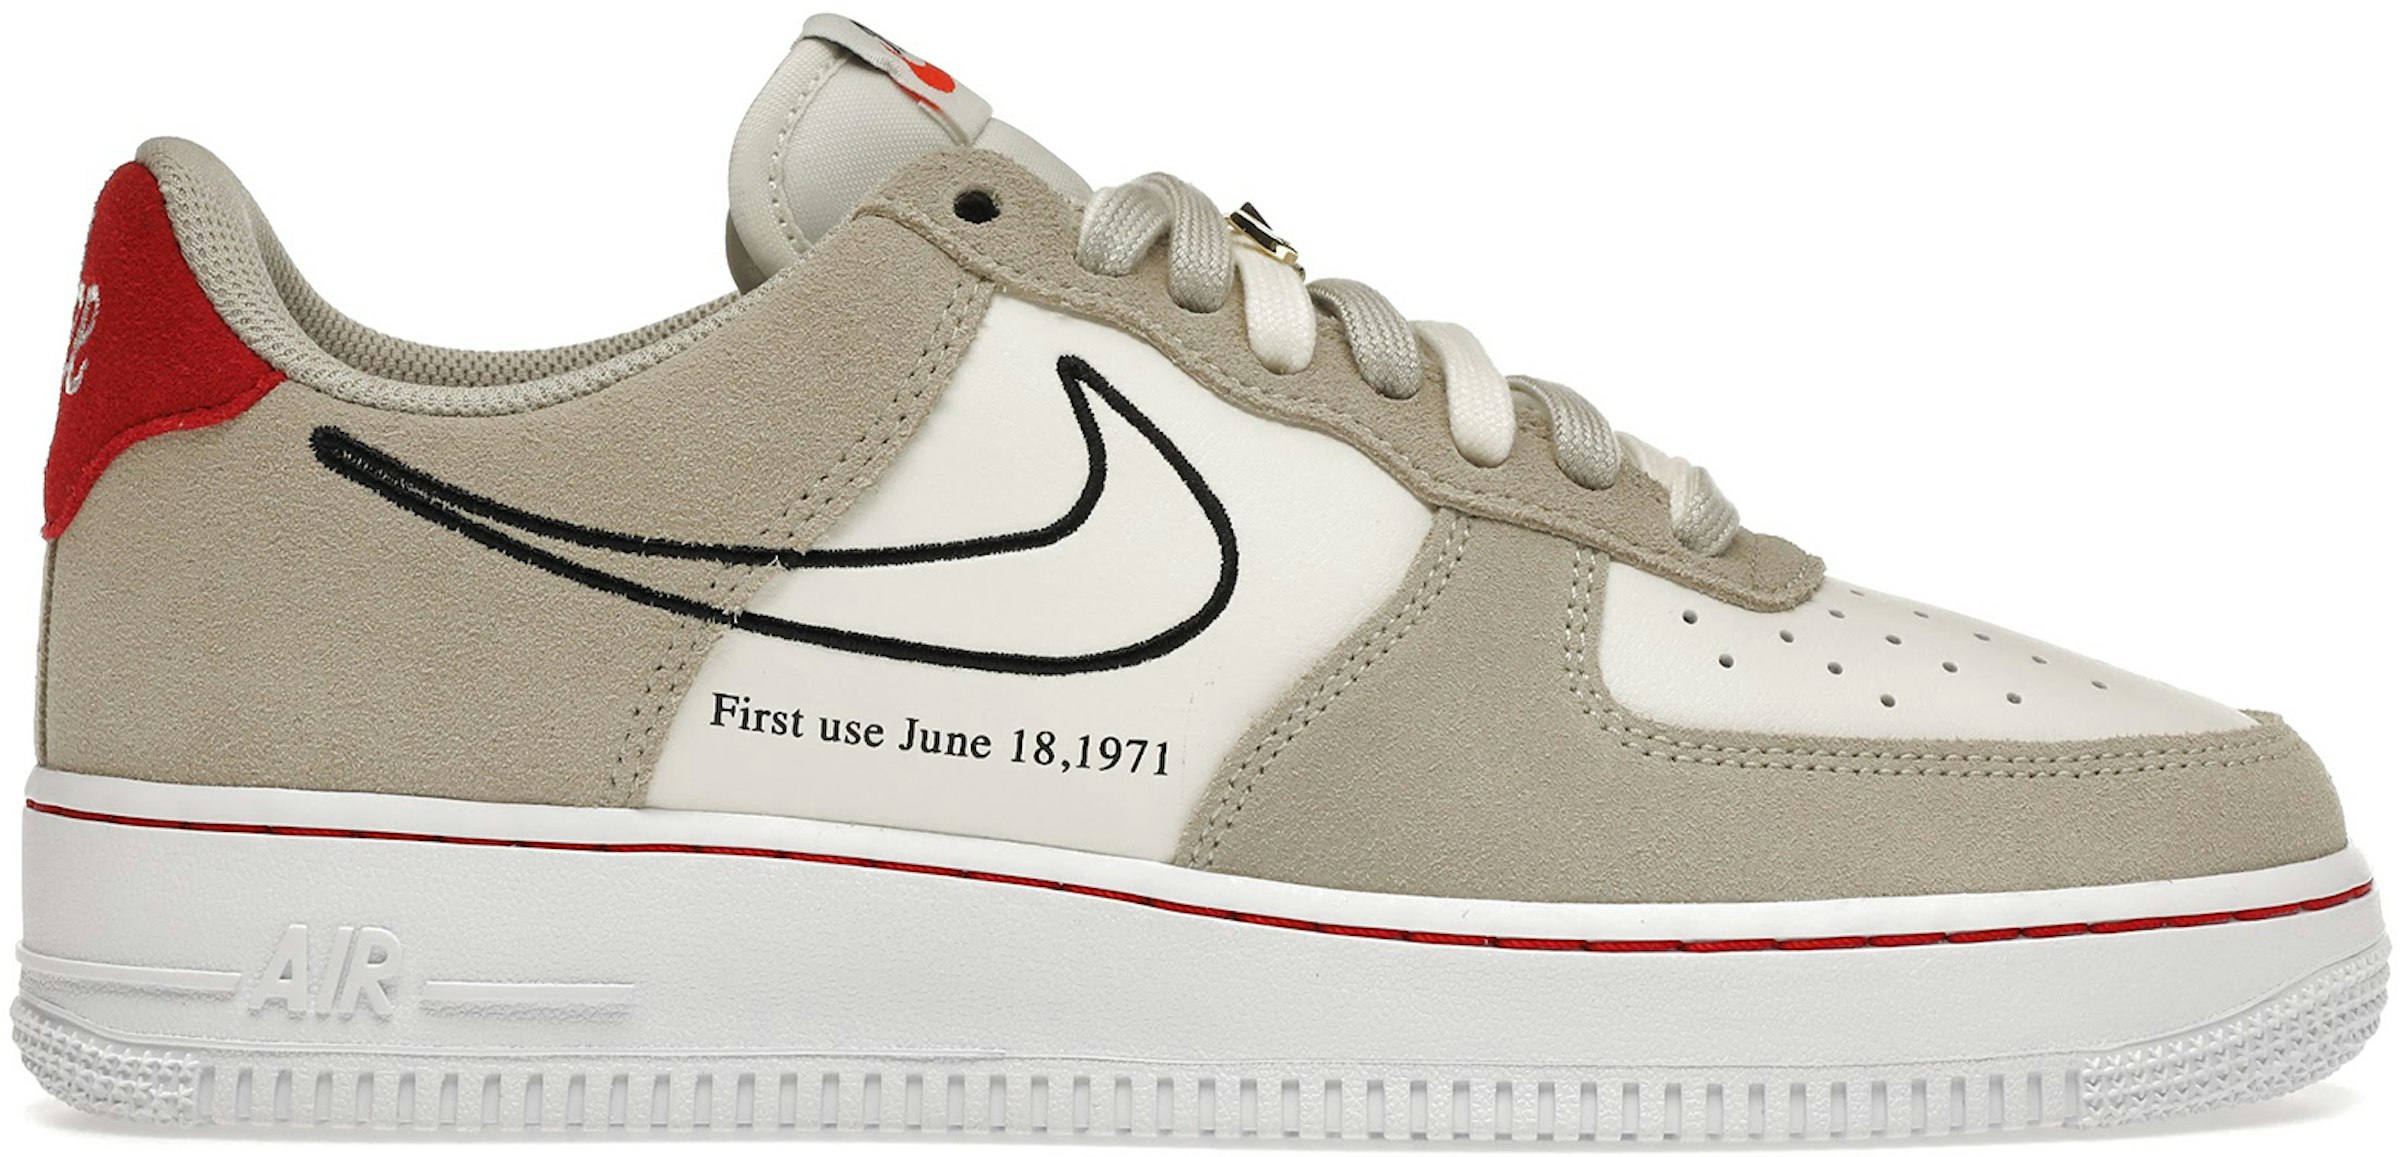 Nike Air Force 1 First Light Sail Red Men's - DB3597-100 - US